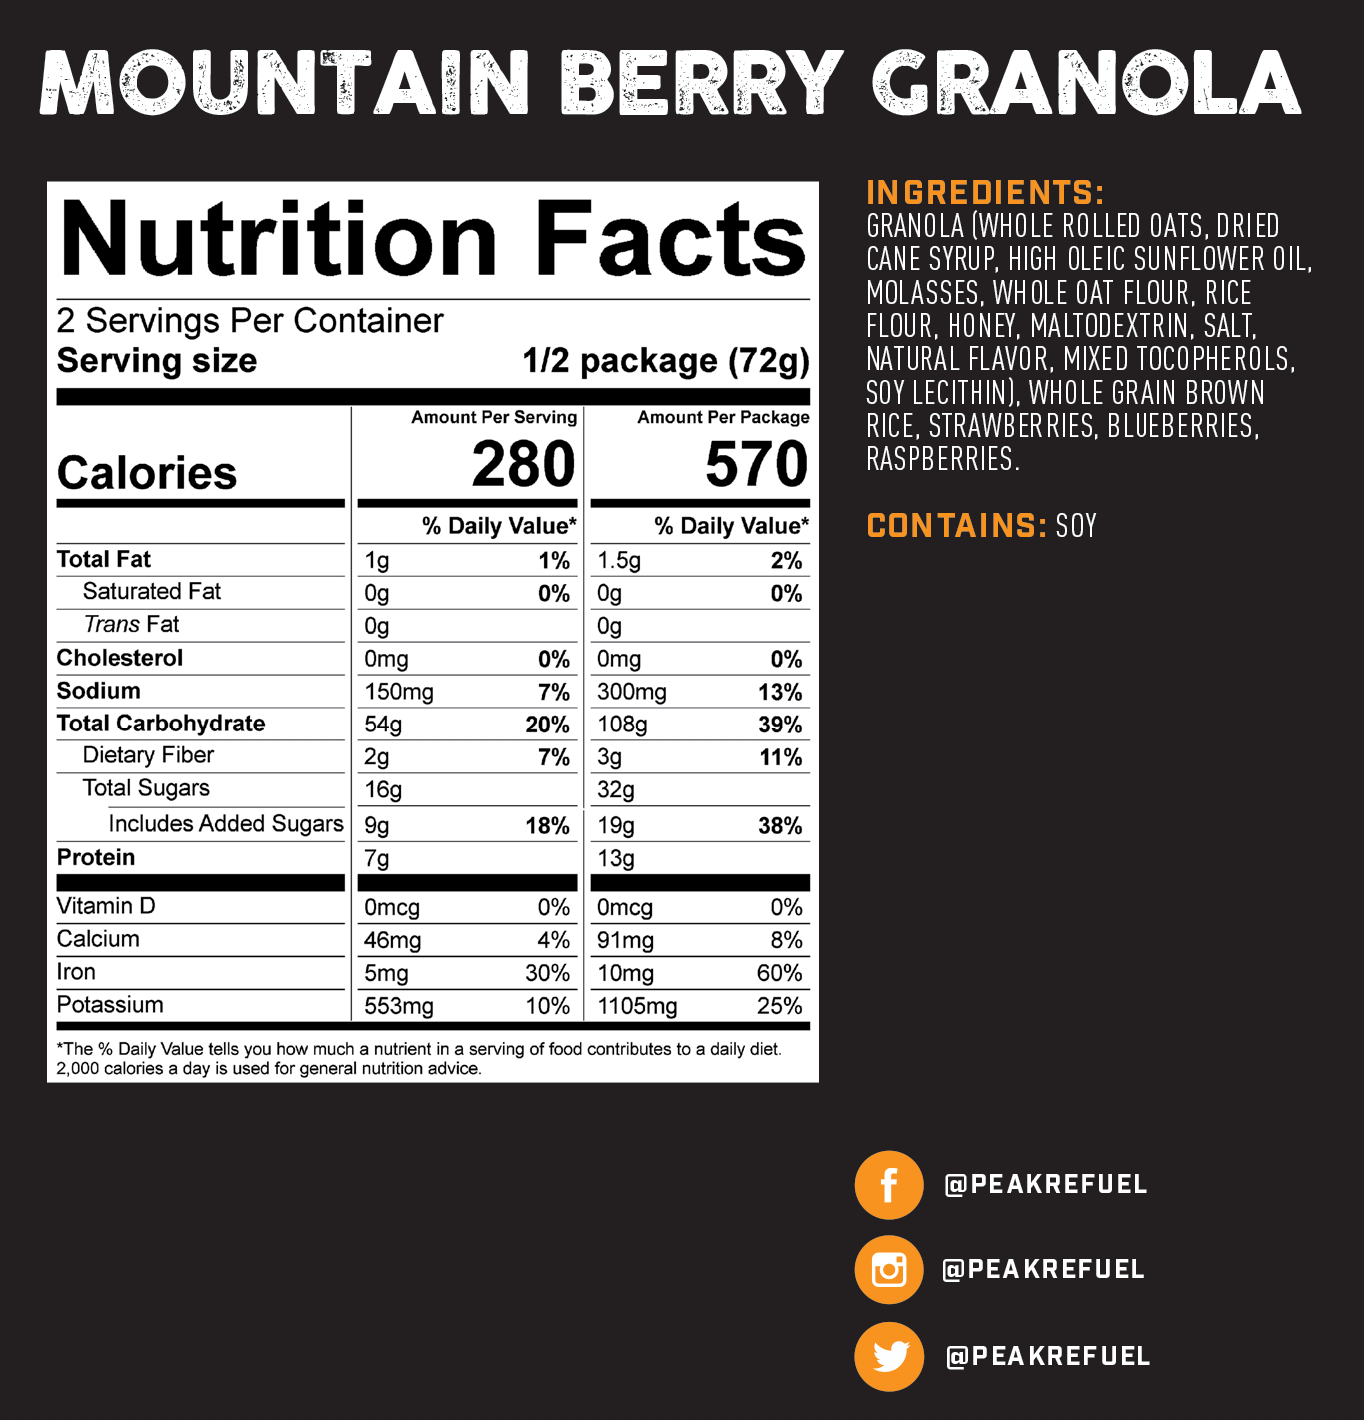 A nutrition label with text and images, including a camera logo and nutrition facts label, complementing the undefined product.